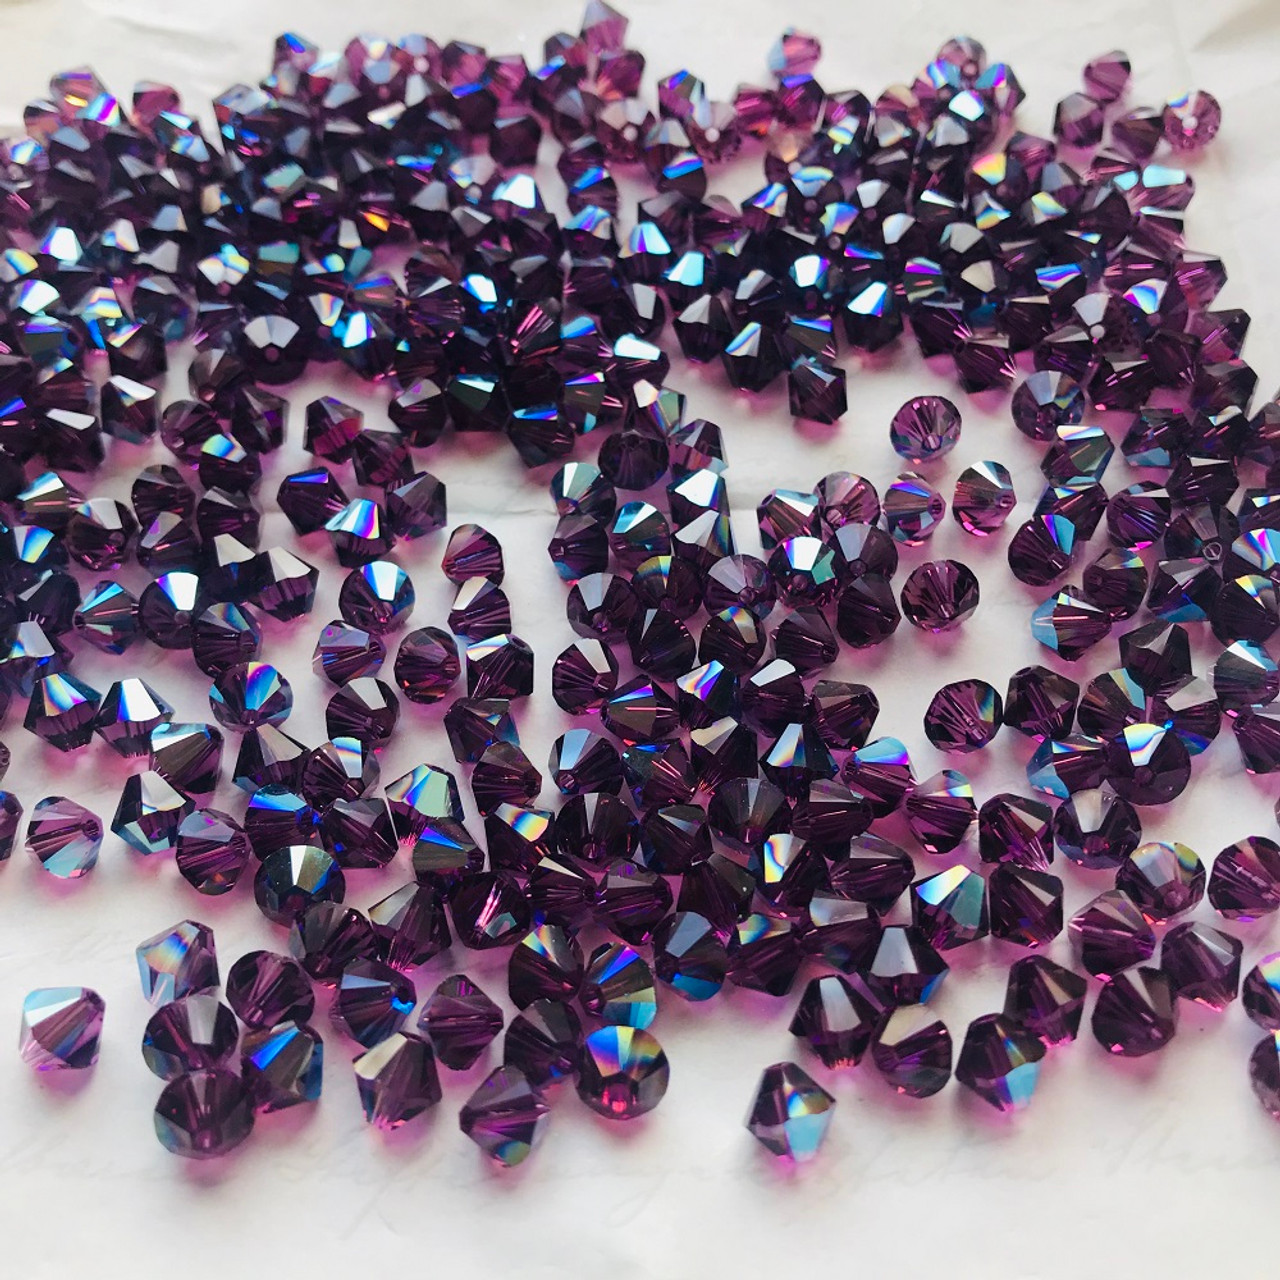  12pcs Authentic Swarovski Crystals 5328 Xilion 8mm (0.31 inch)  Amethyst Bicone Crystal Beads for Jewelry Craft Making SWA-B811